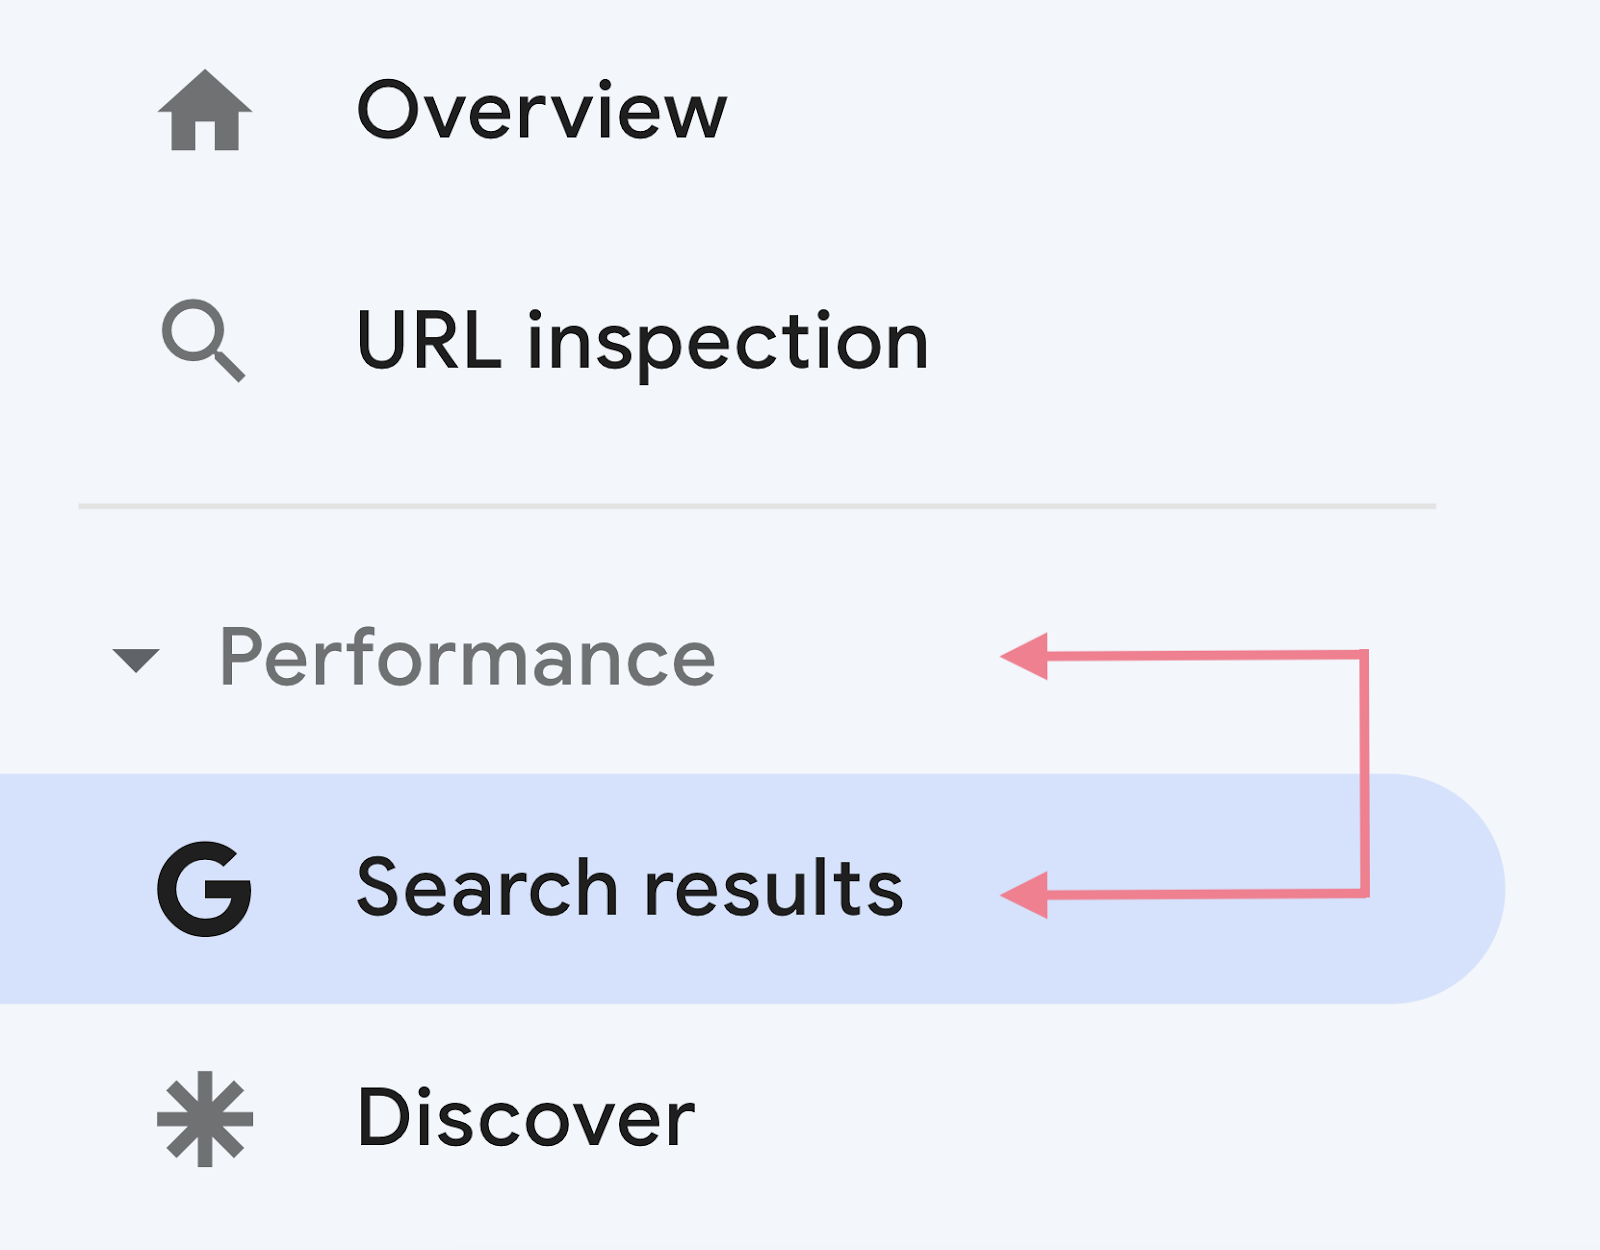 Search results under performance